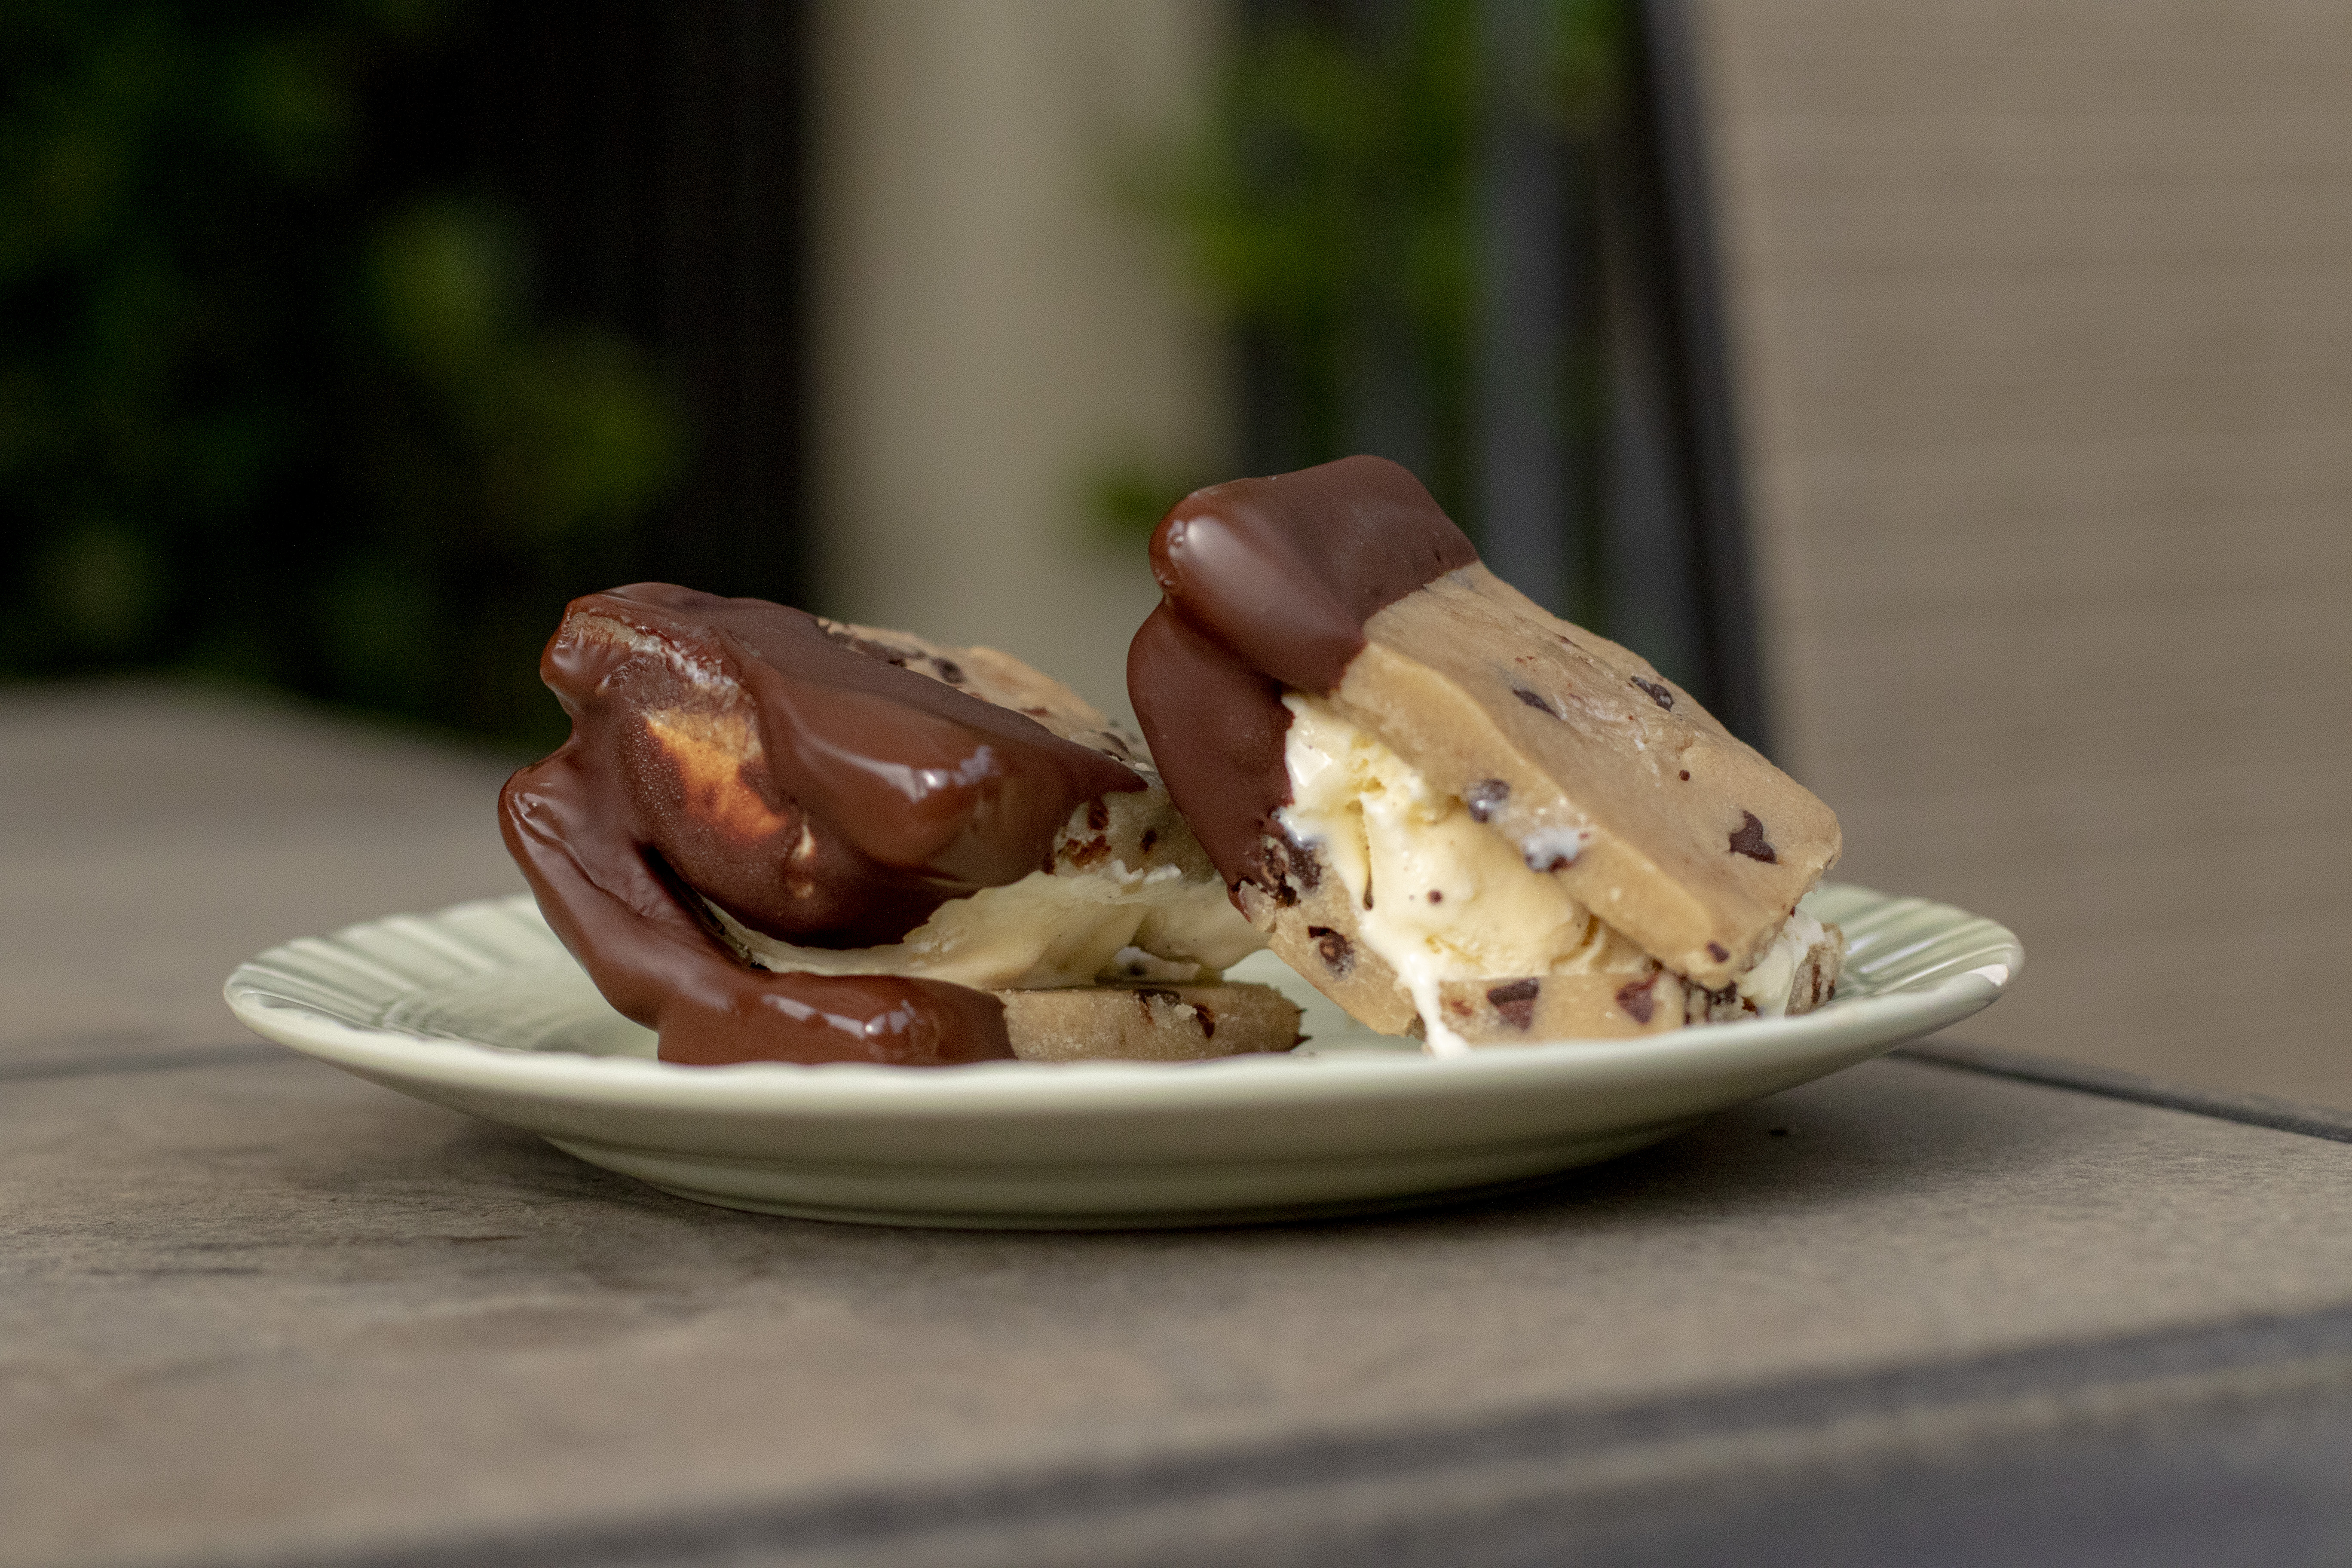 cookie dough ice cream sandwiches coated in chocolate on a green plate sitting on a patio table outside.